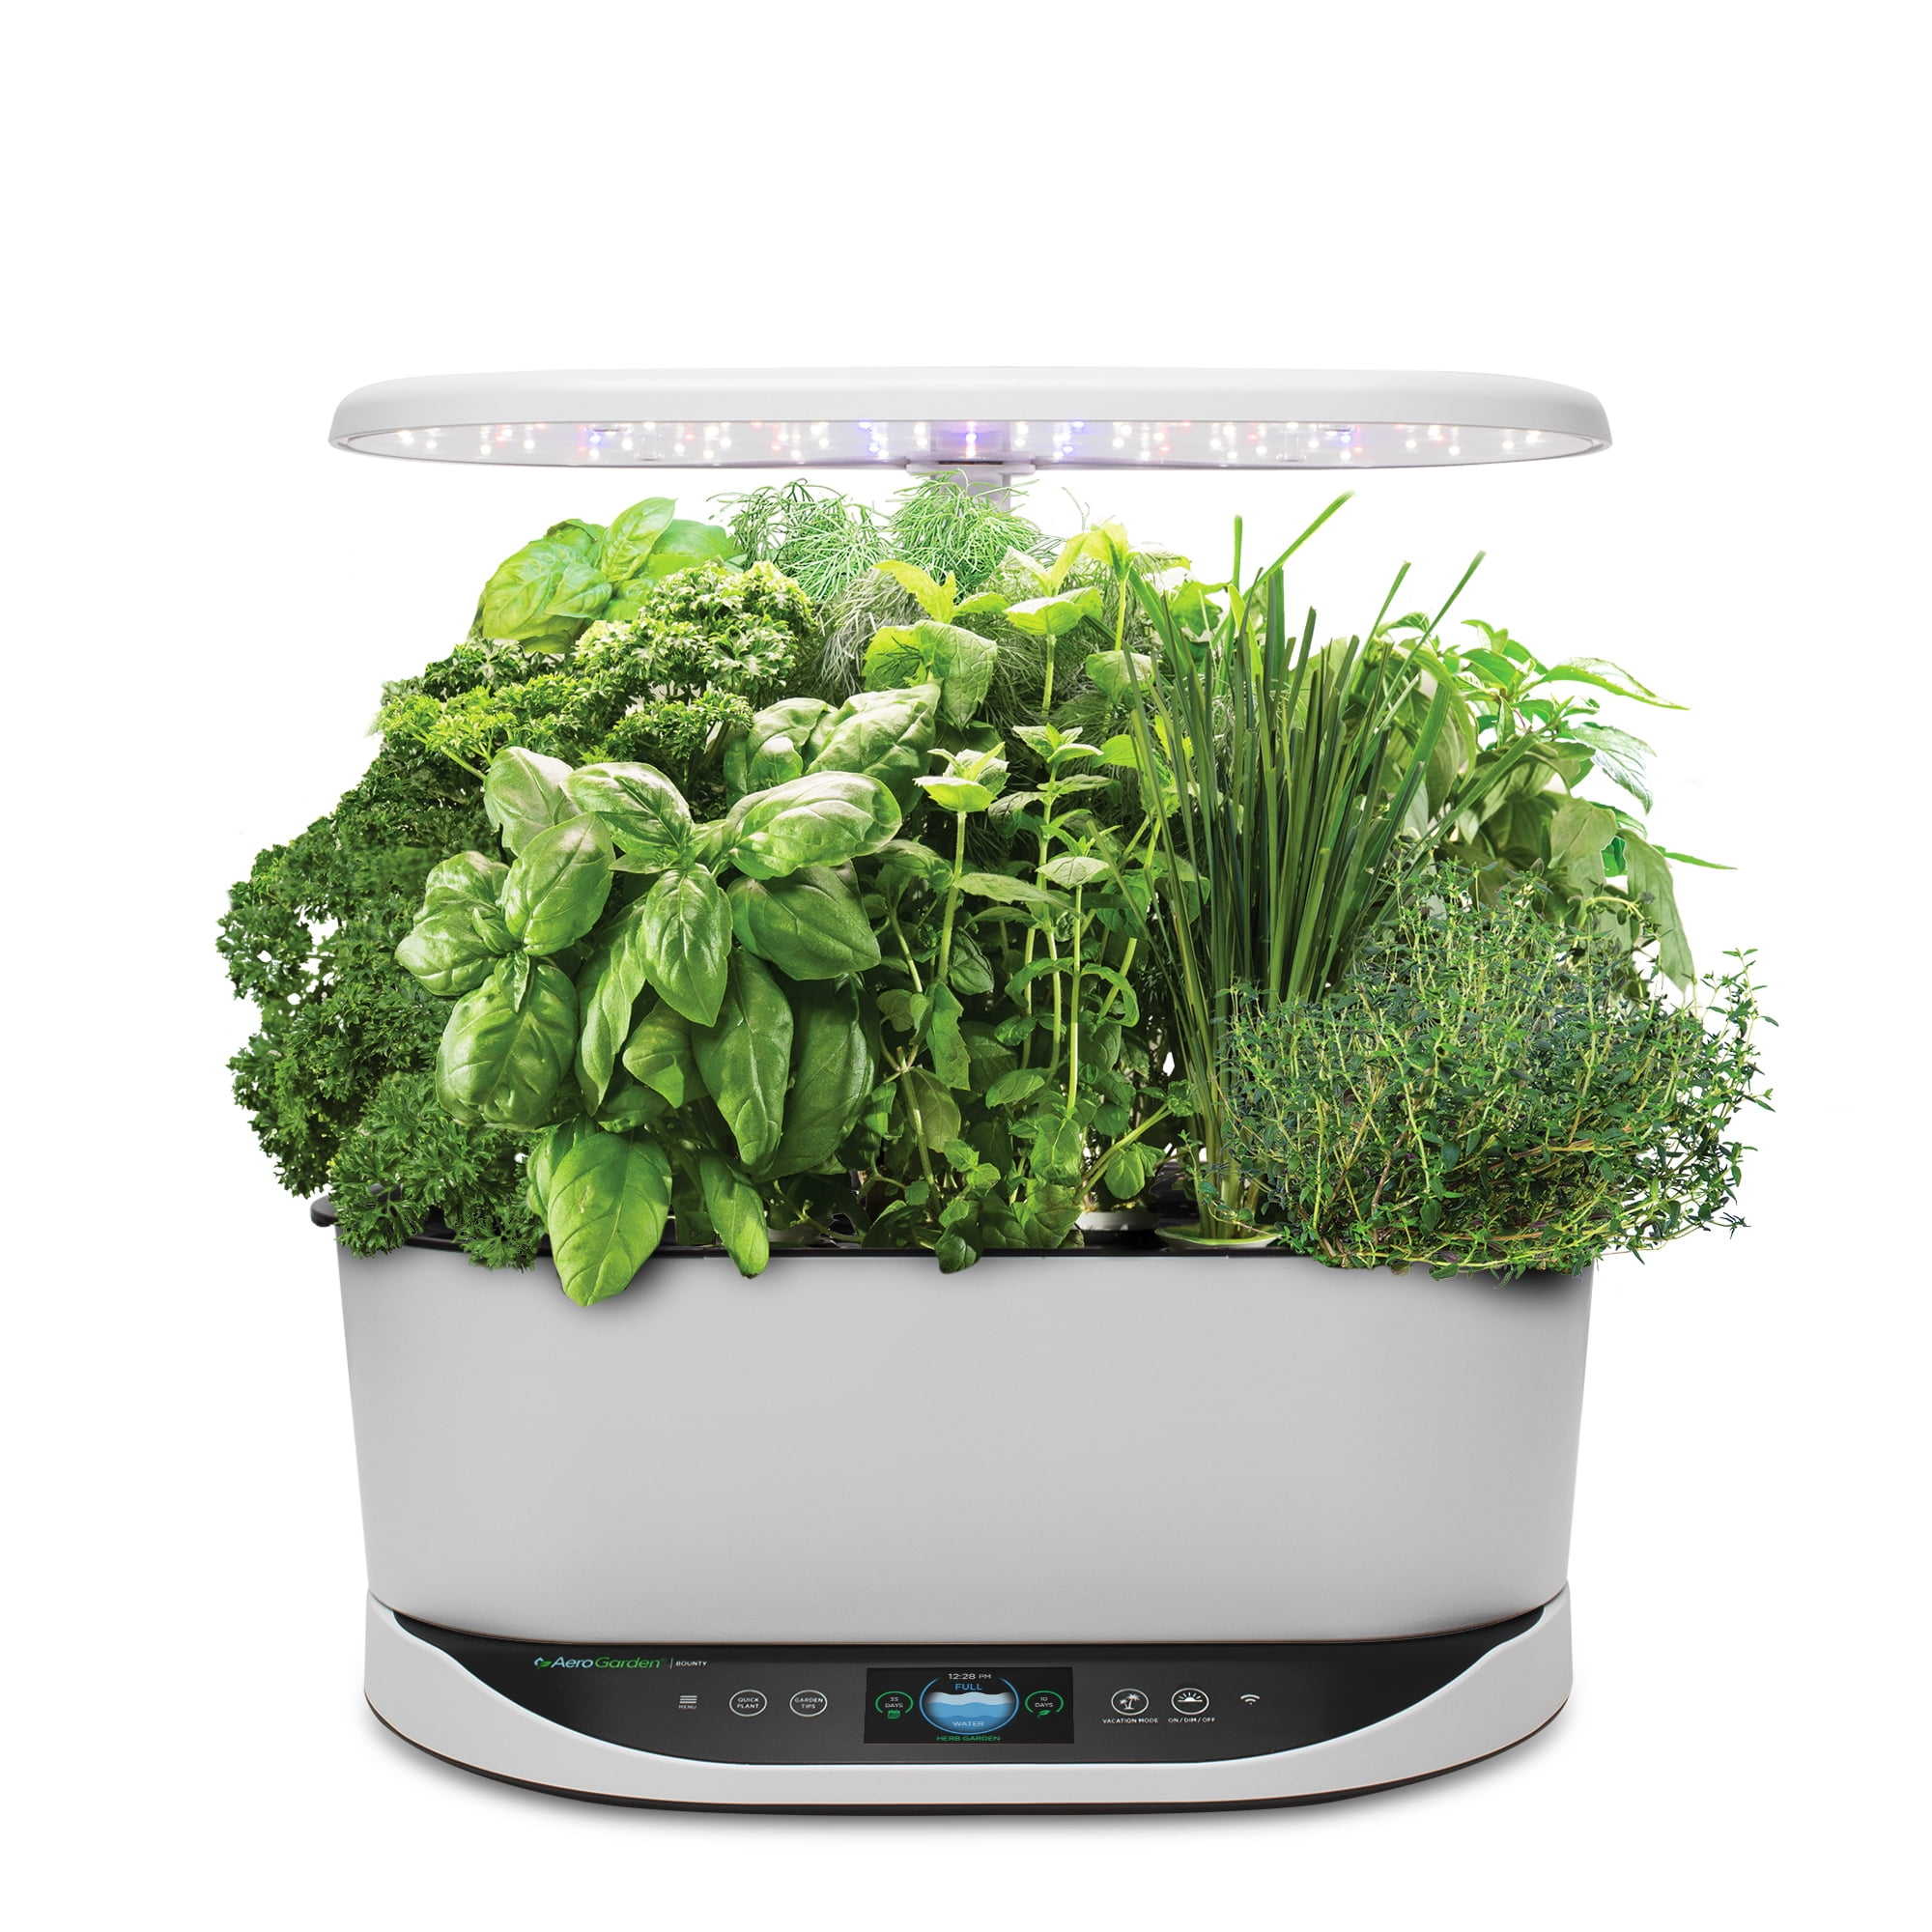 Used and Working Various Sizes & Colors Deal AEROGARDENS Grow Food Indoors 